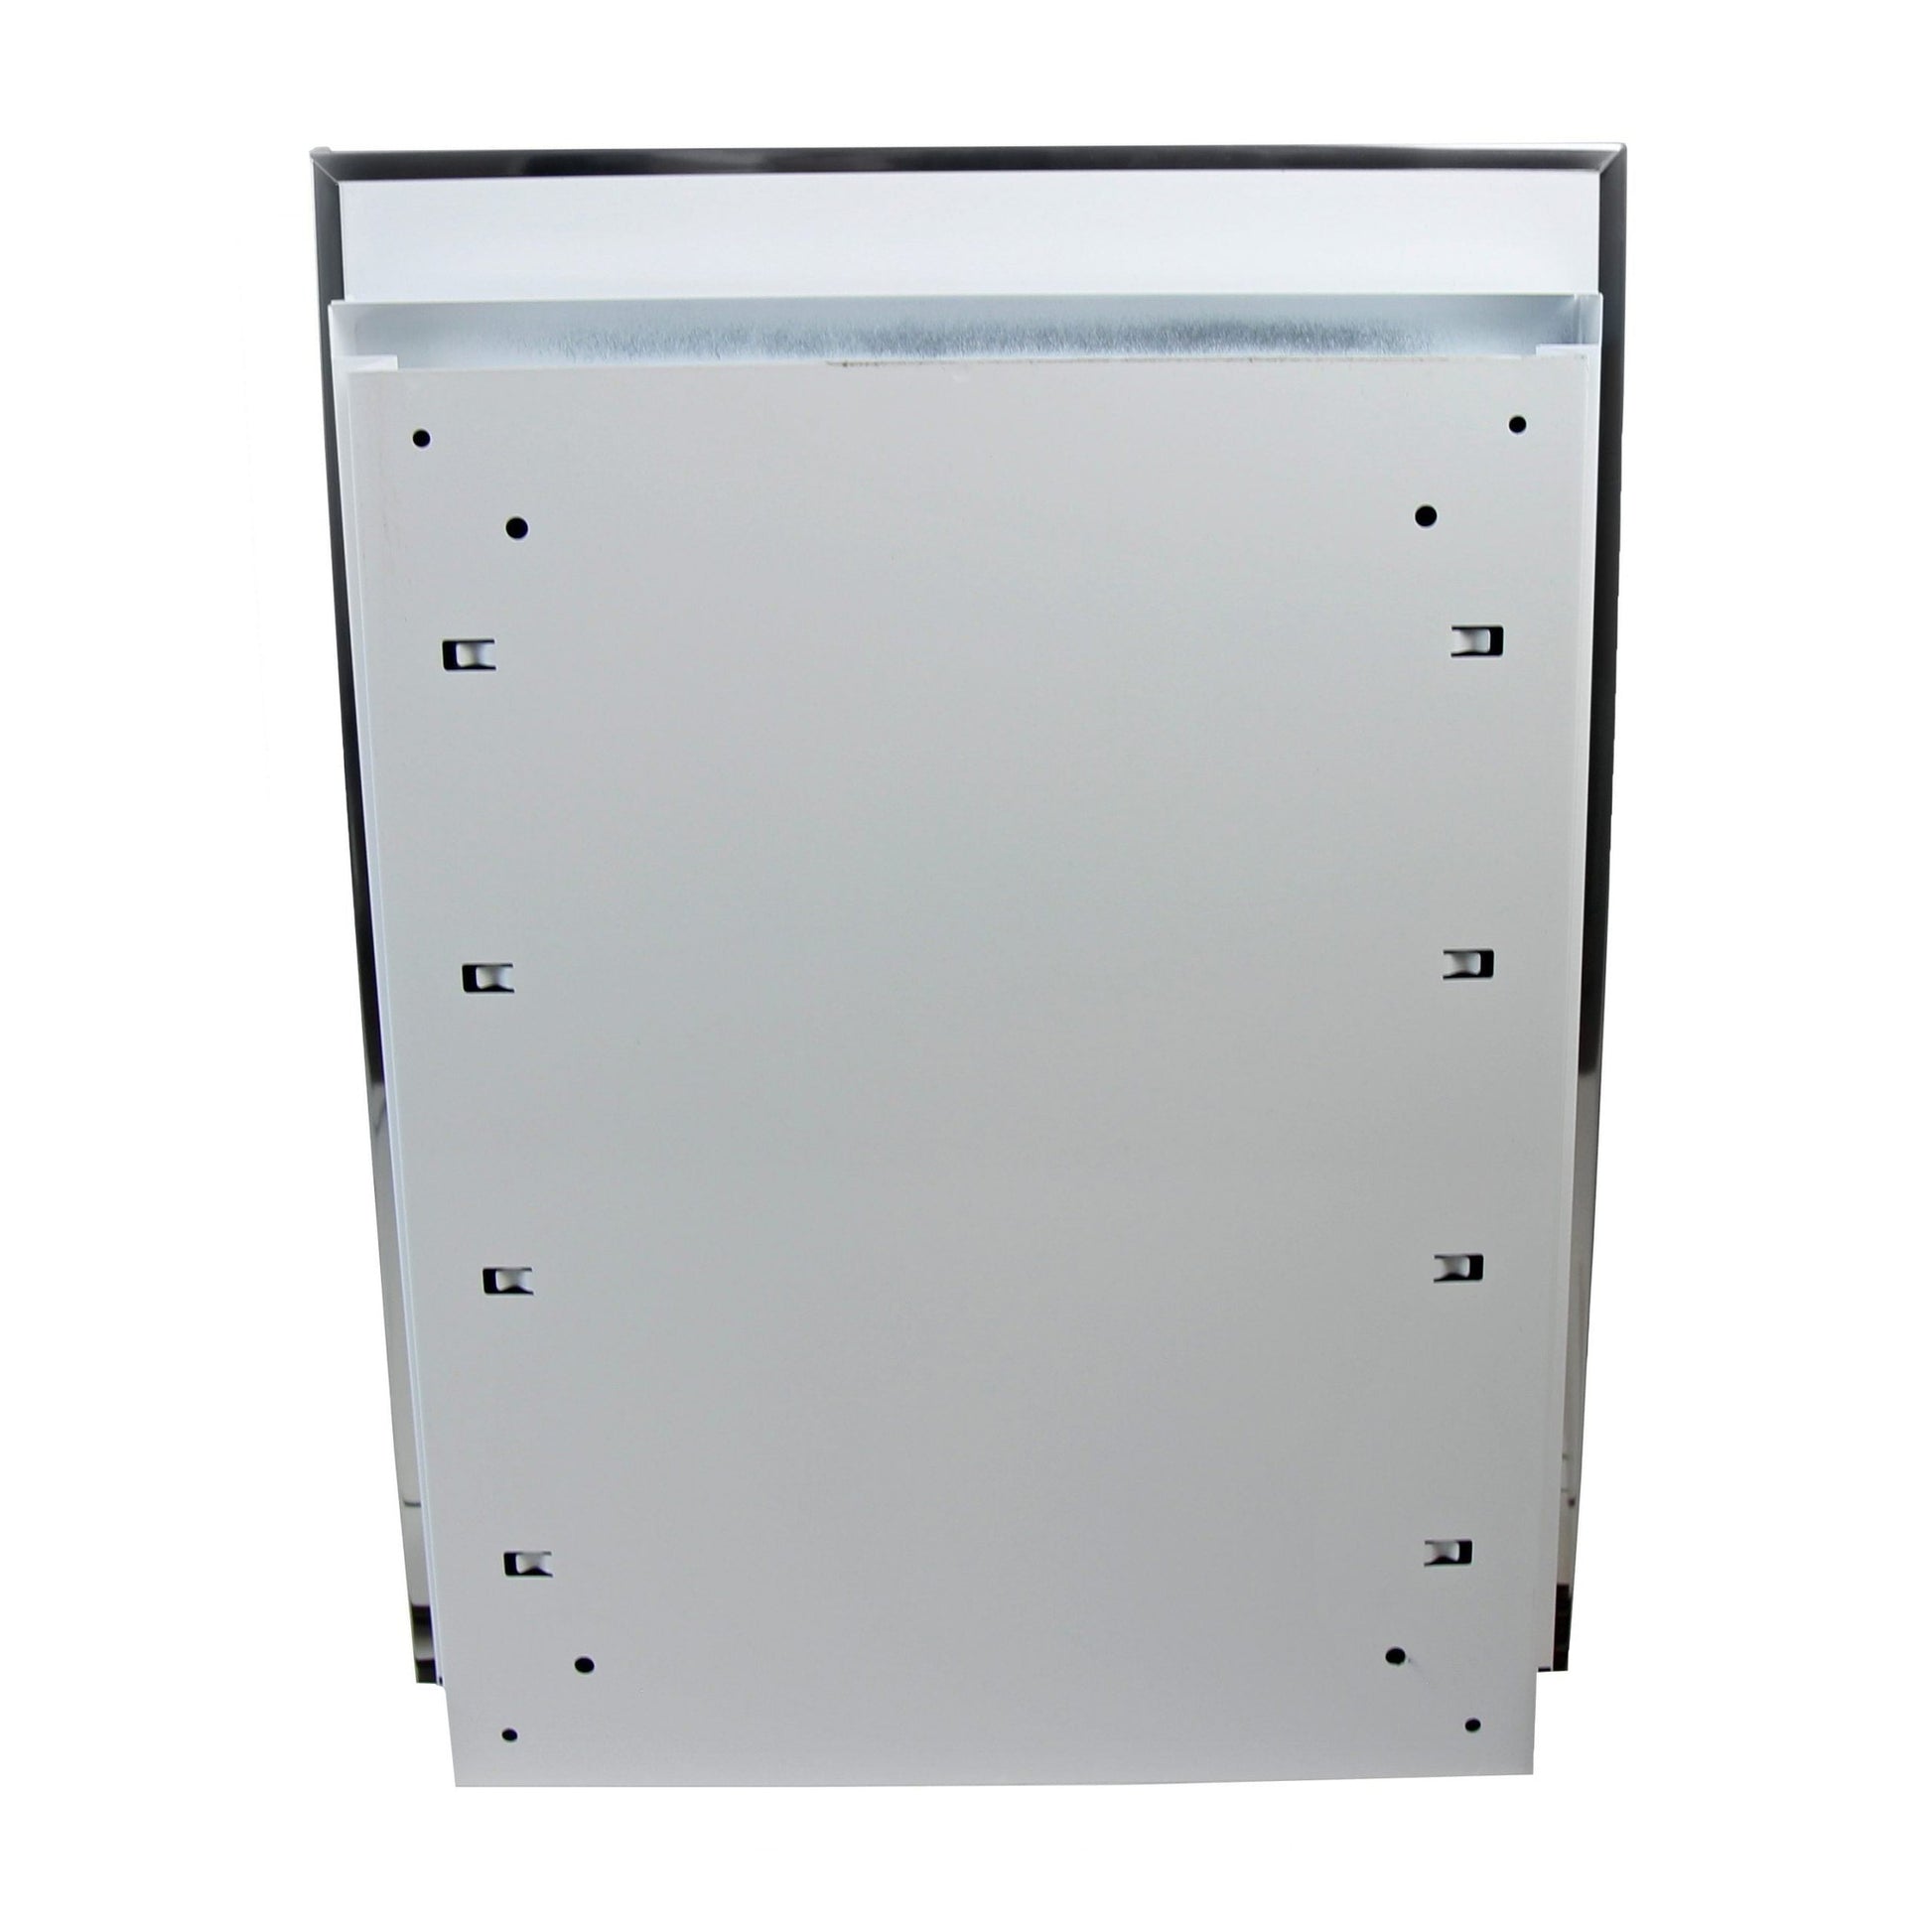 Frost 812W Wall Mounted White Medicine Cabinet